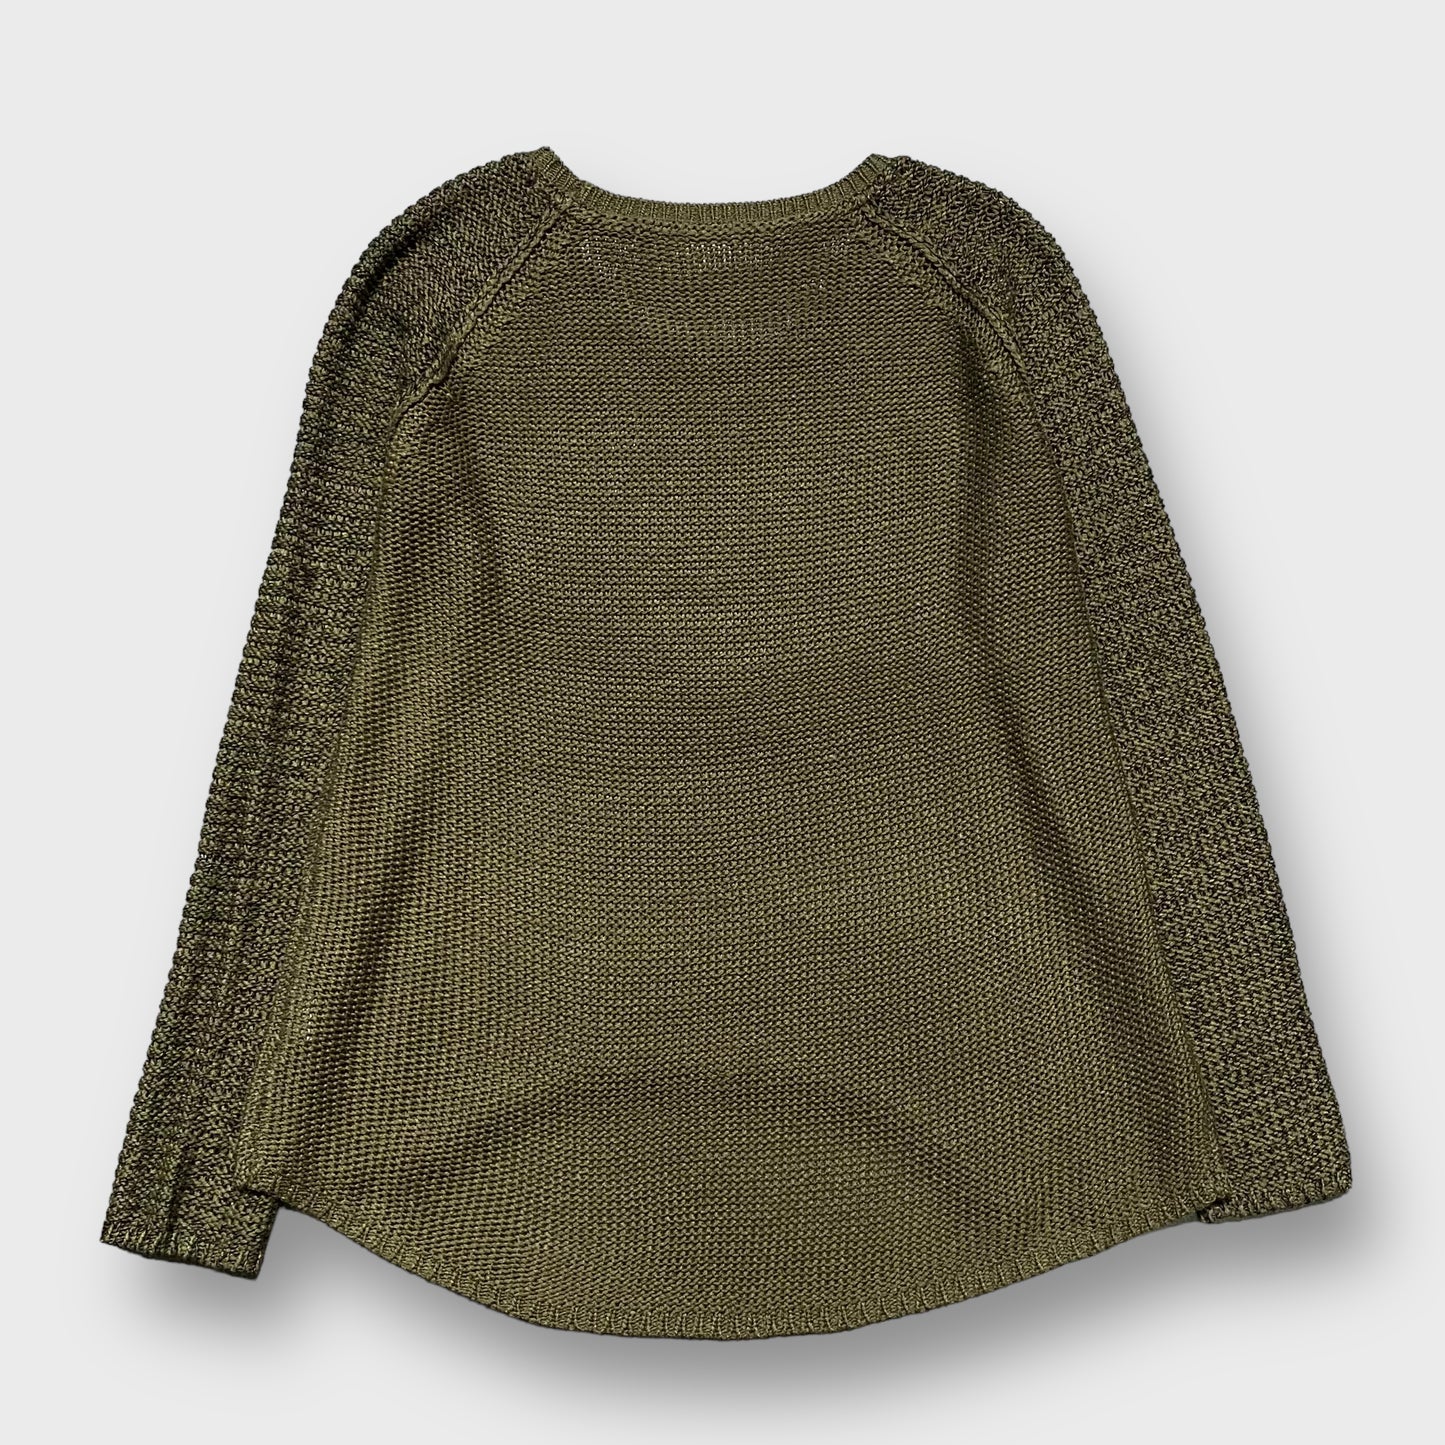 Weave switching knit sweater